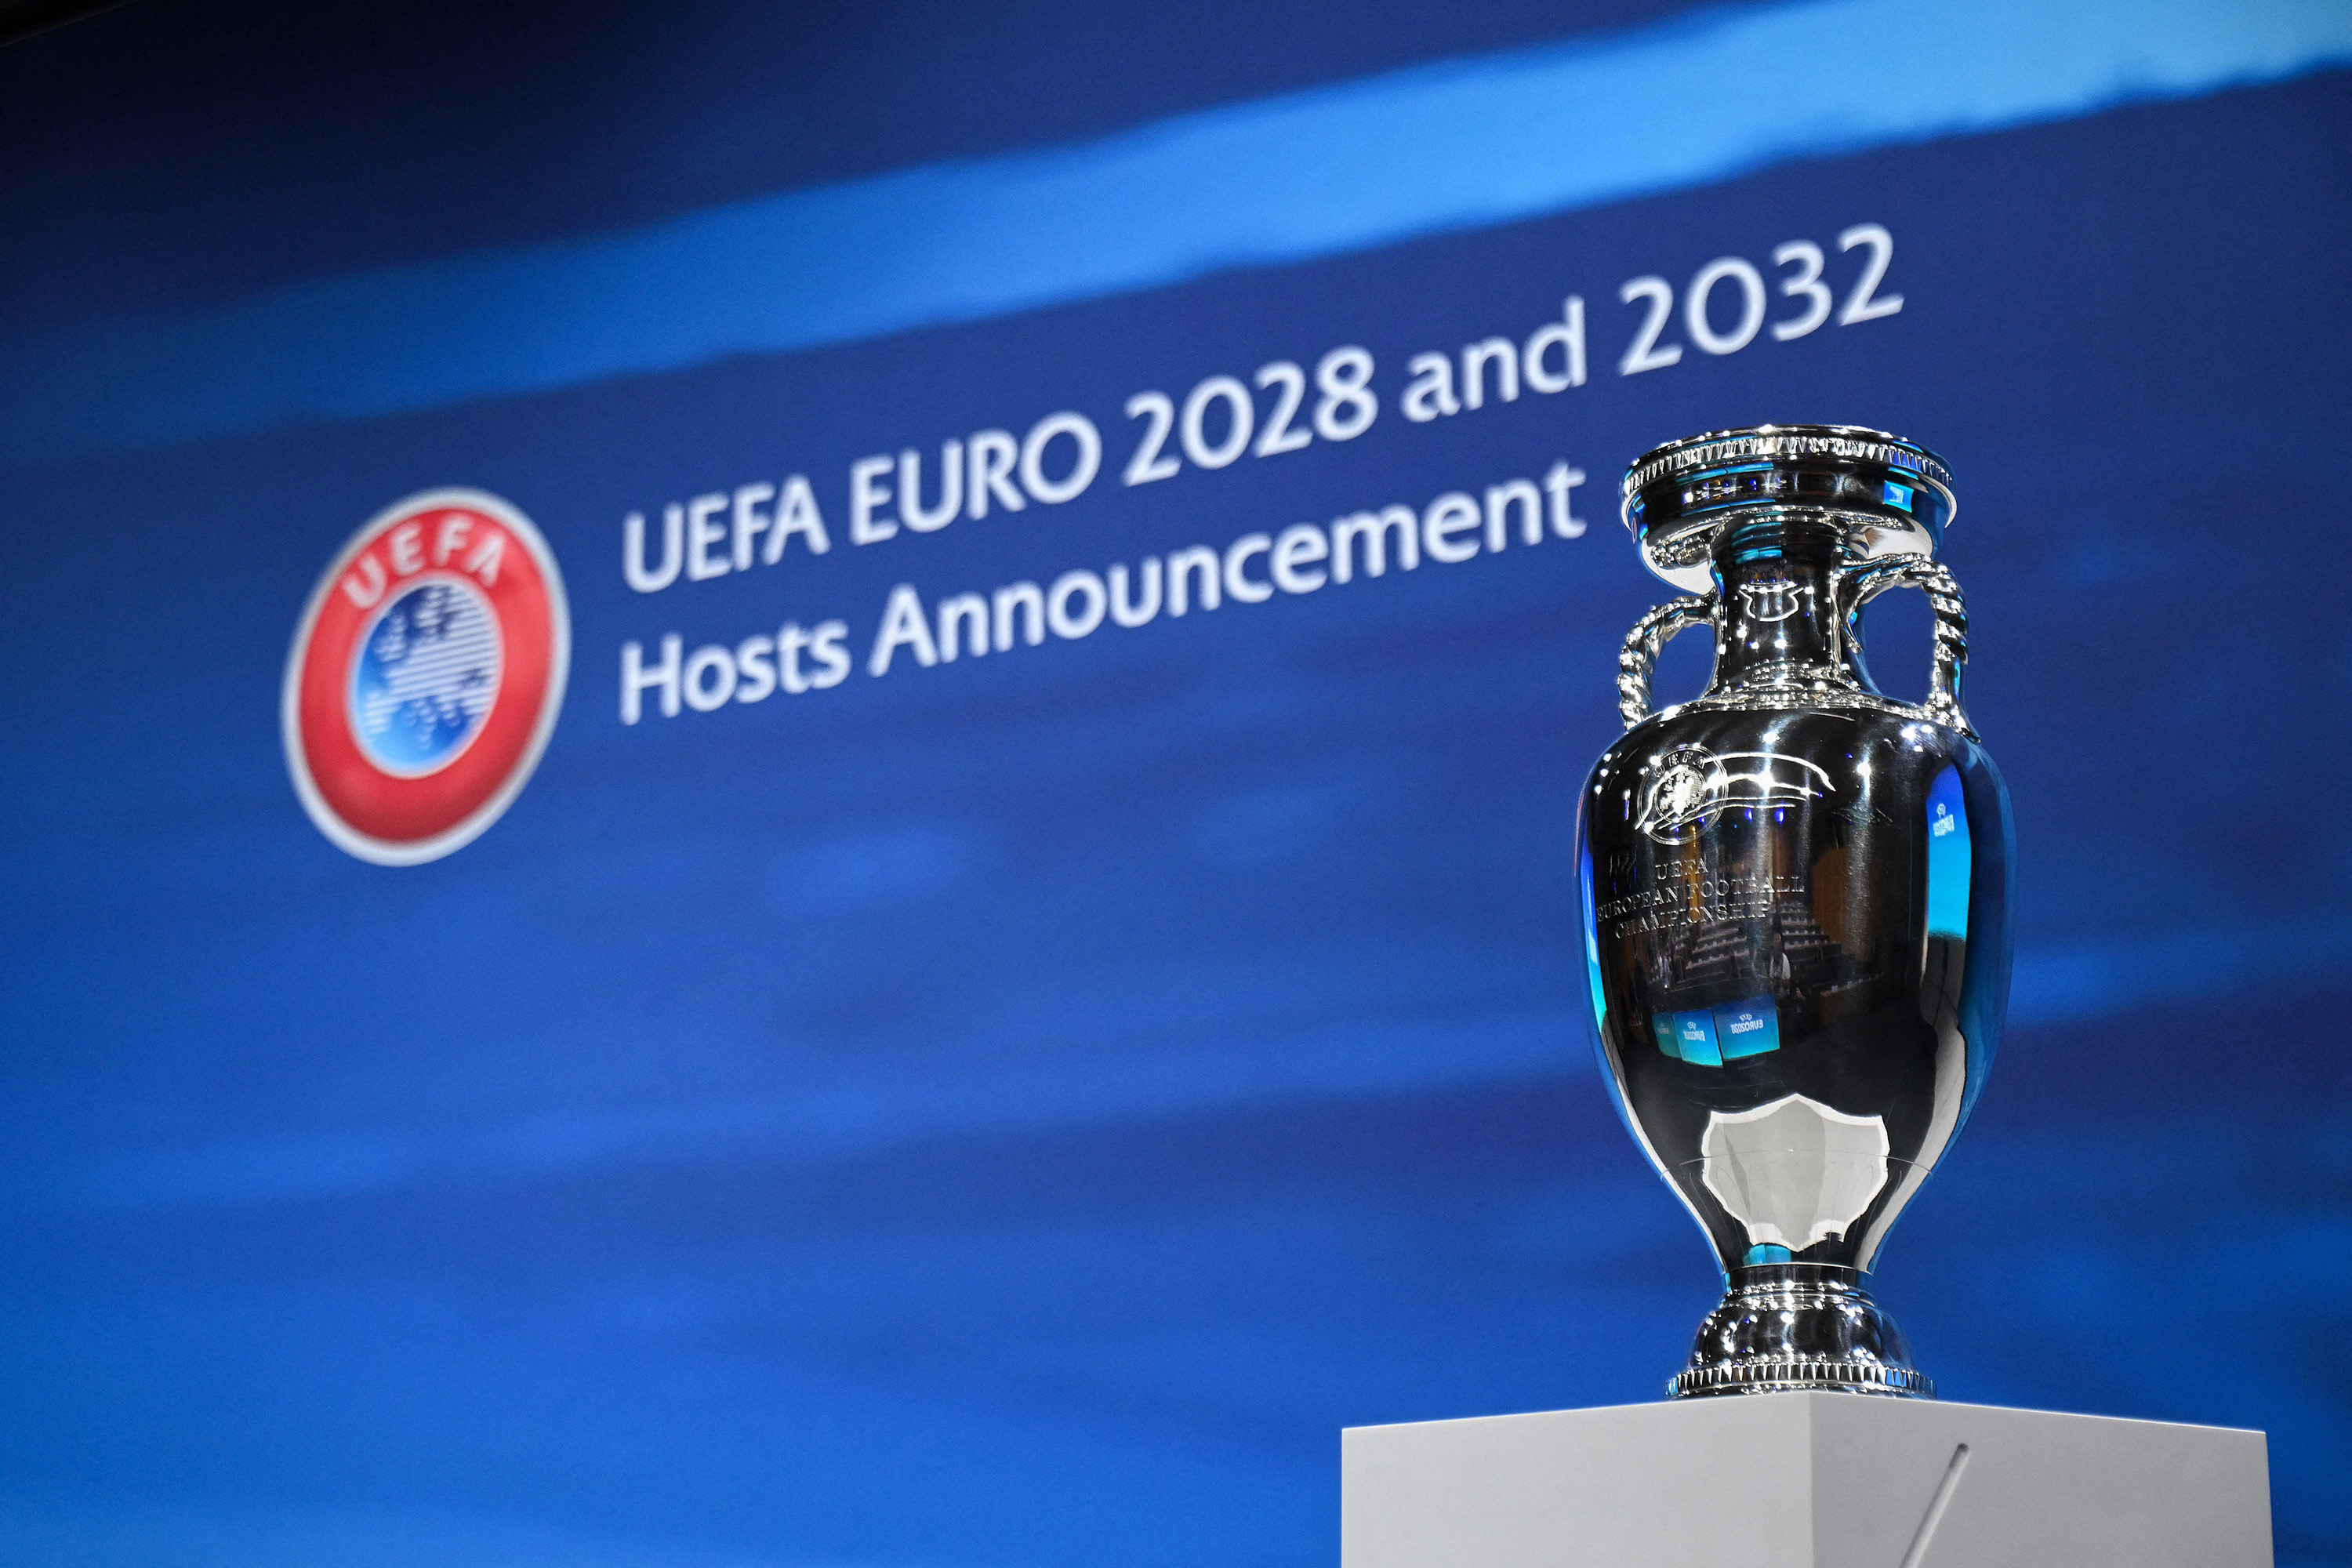 Euro 2028 to be Hosted by UK, Ireland Following Wembley 2021 Final ...